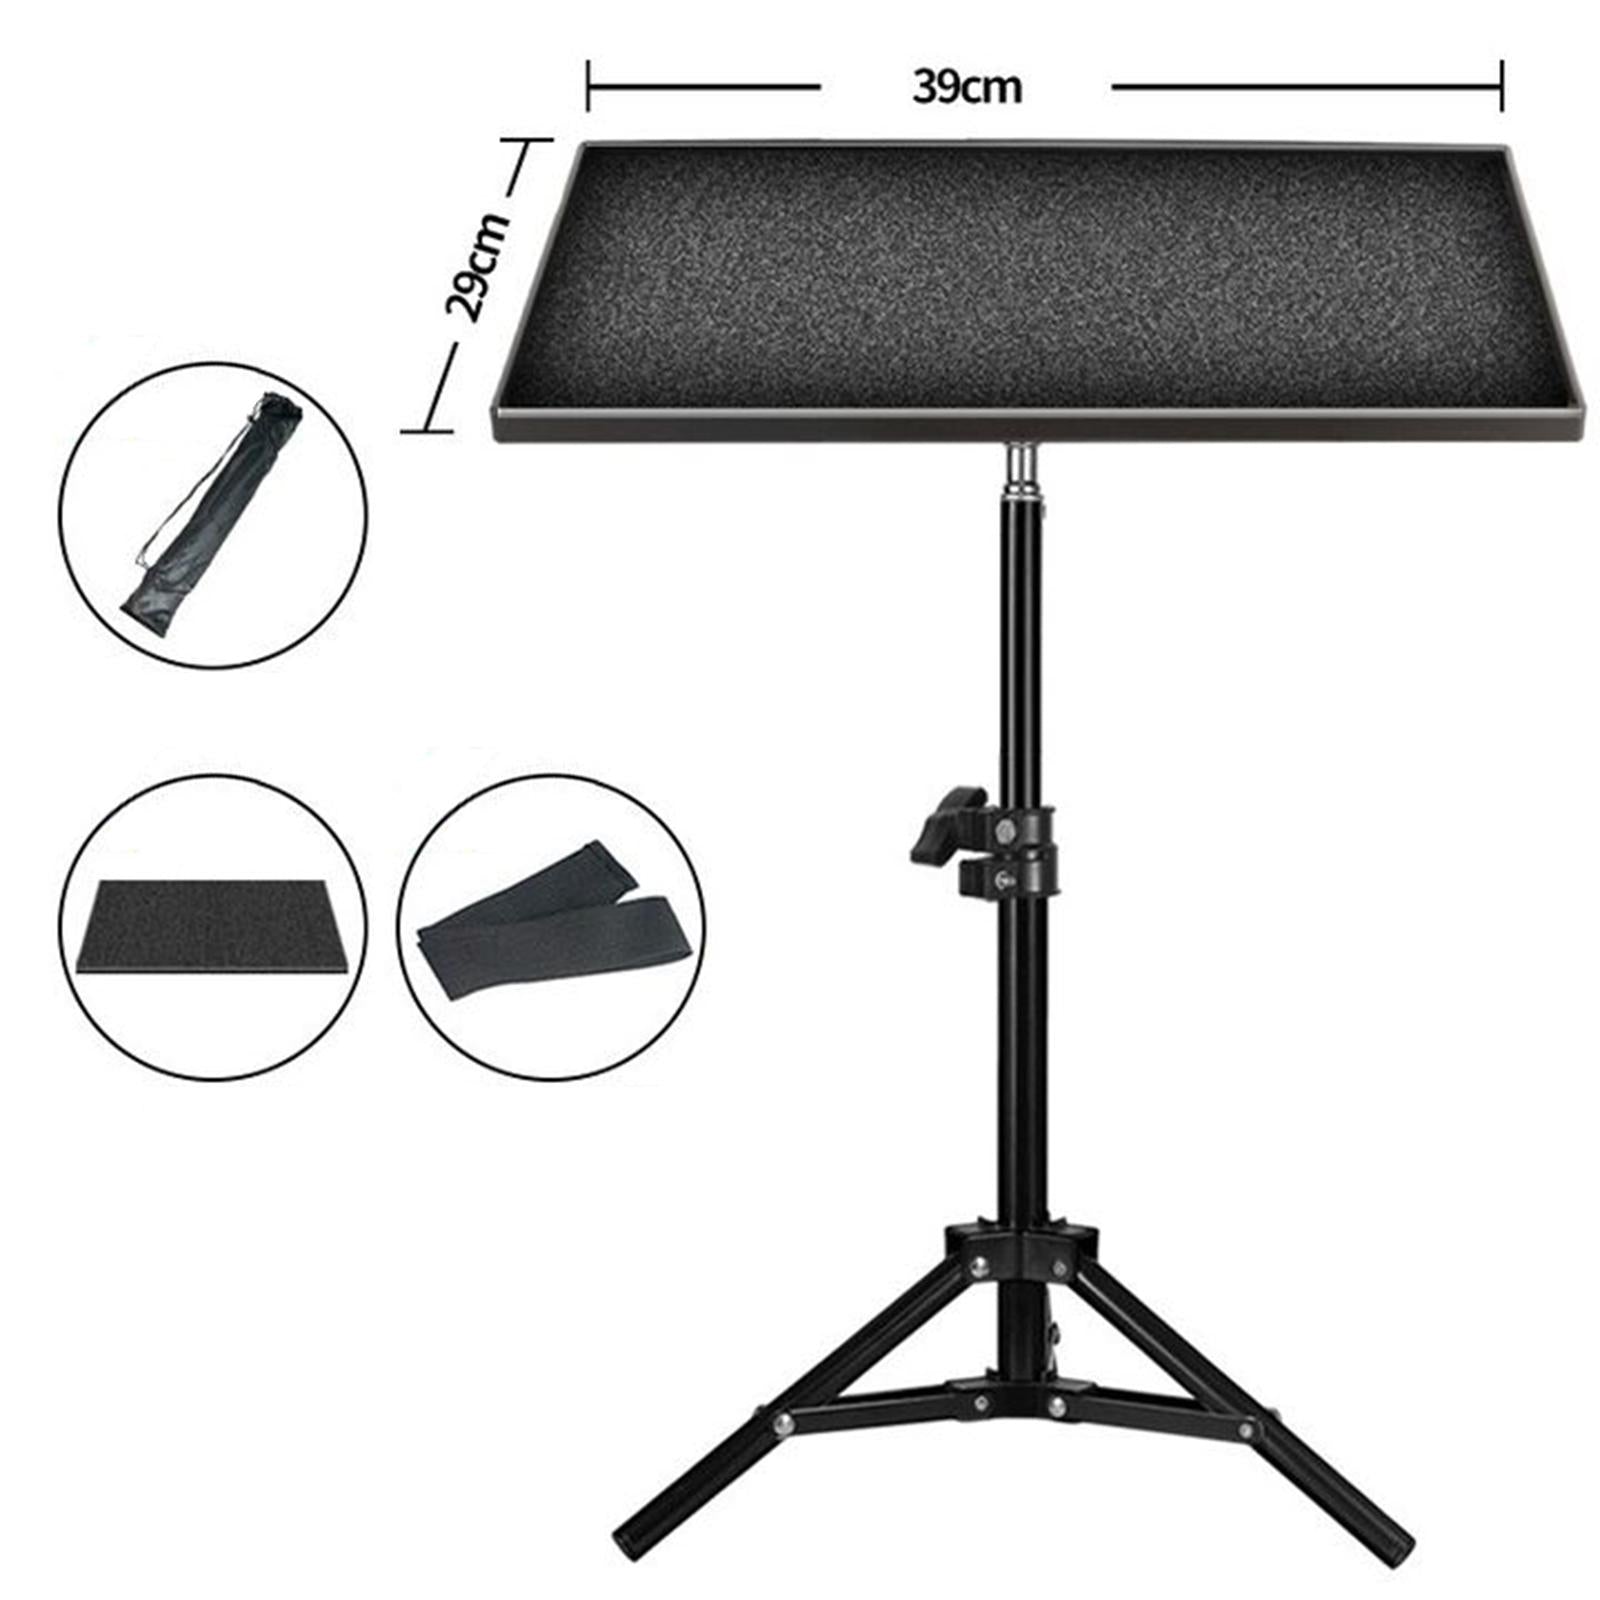 Projector Tripod Stand Foldable with Adjustable Height Computer Holder Mount 0.6m Holder Tray 